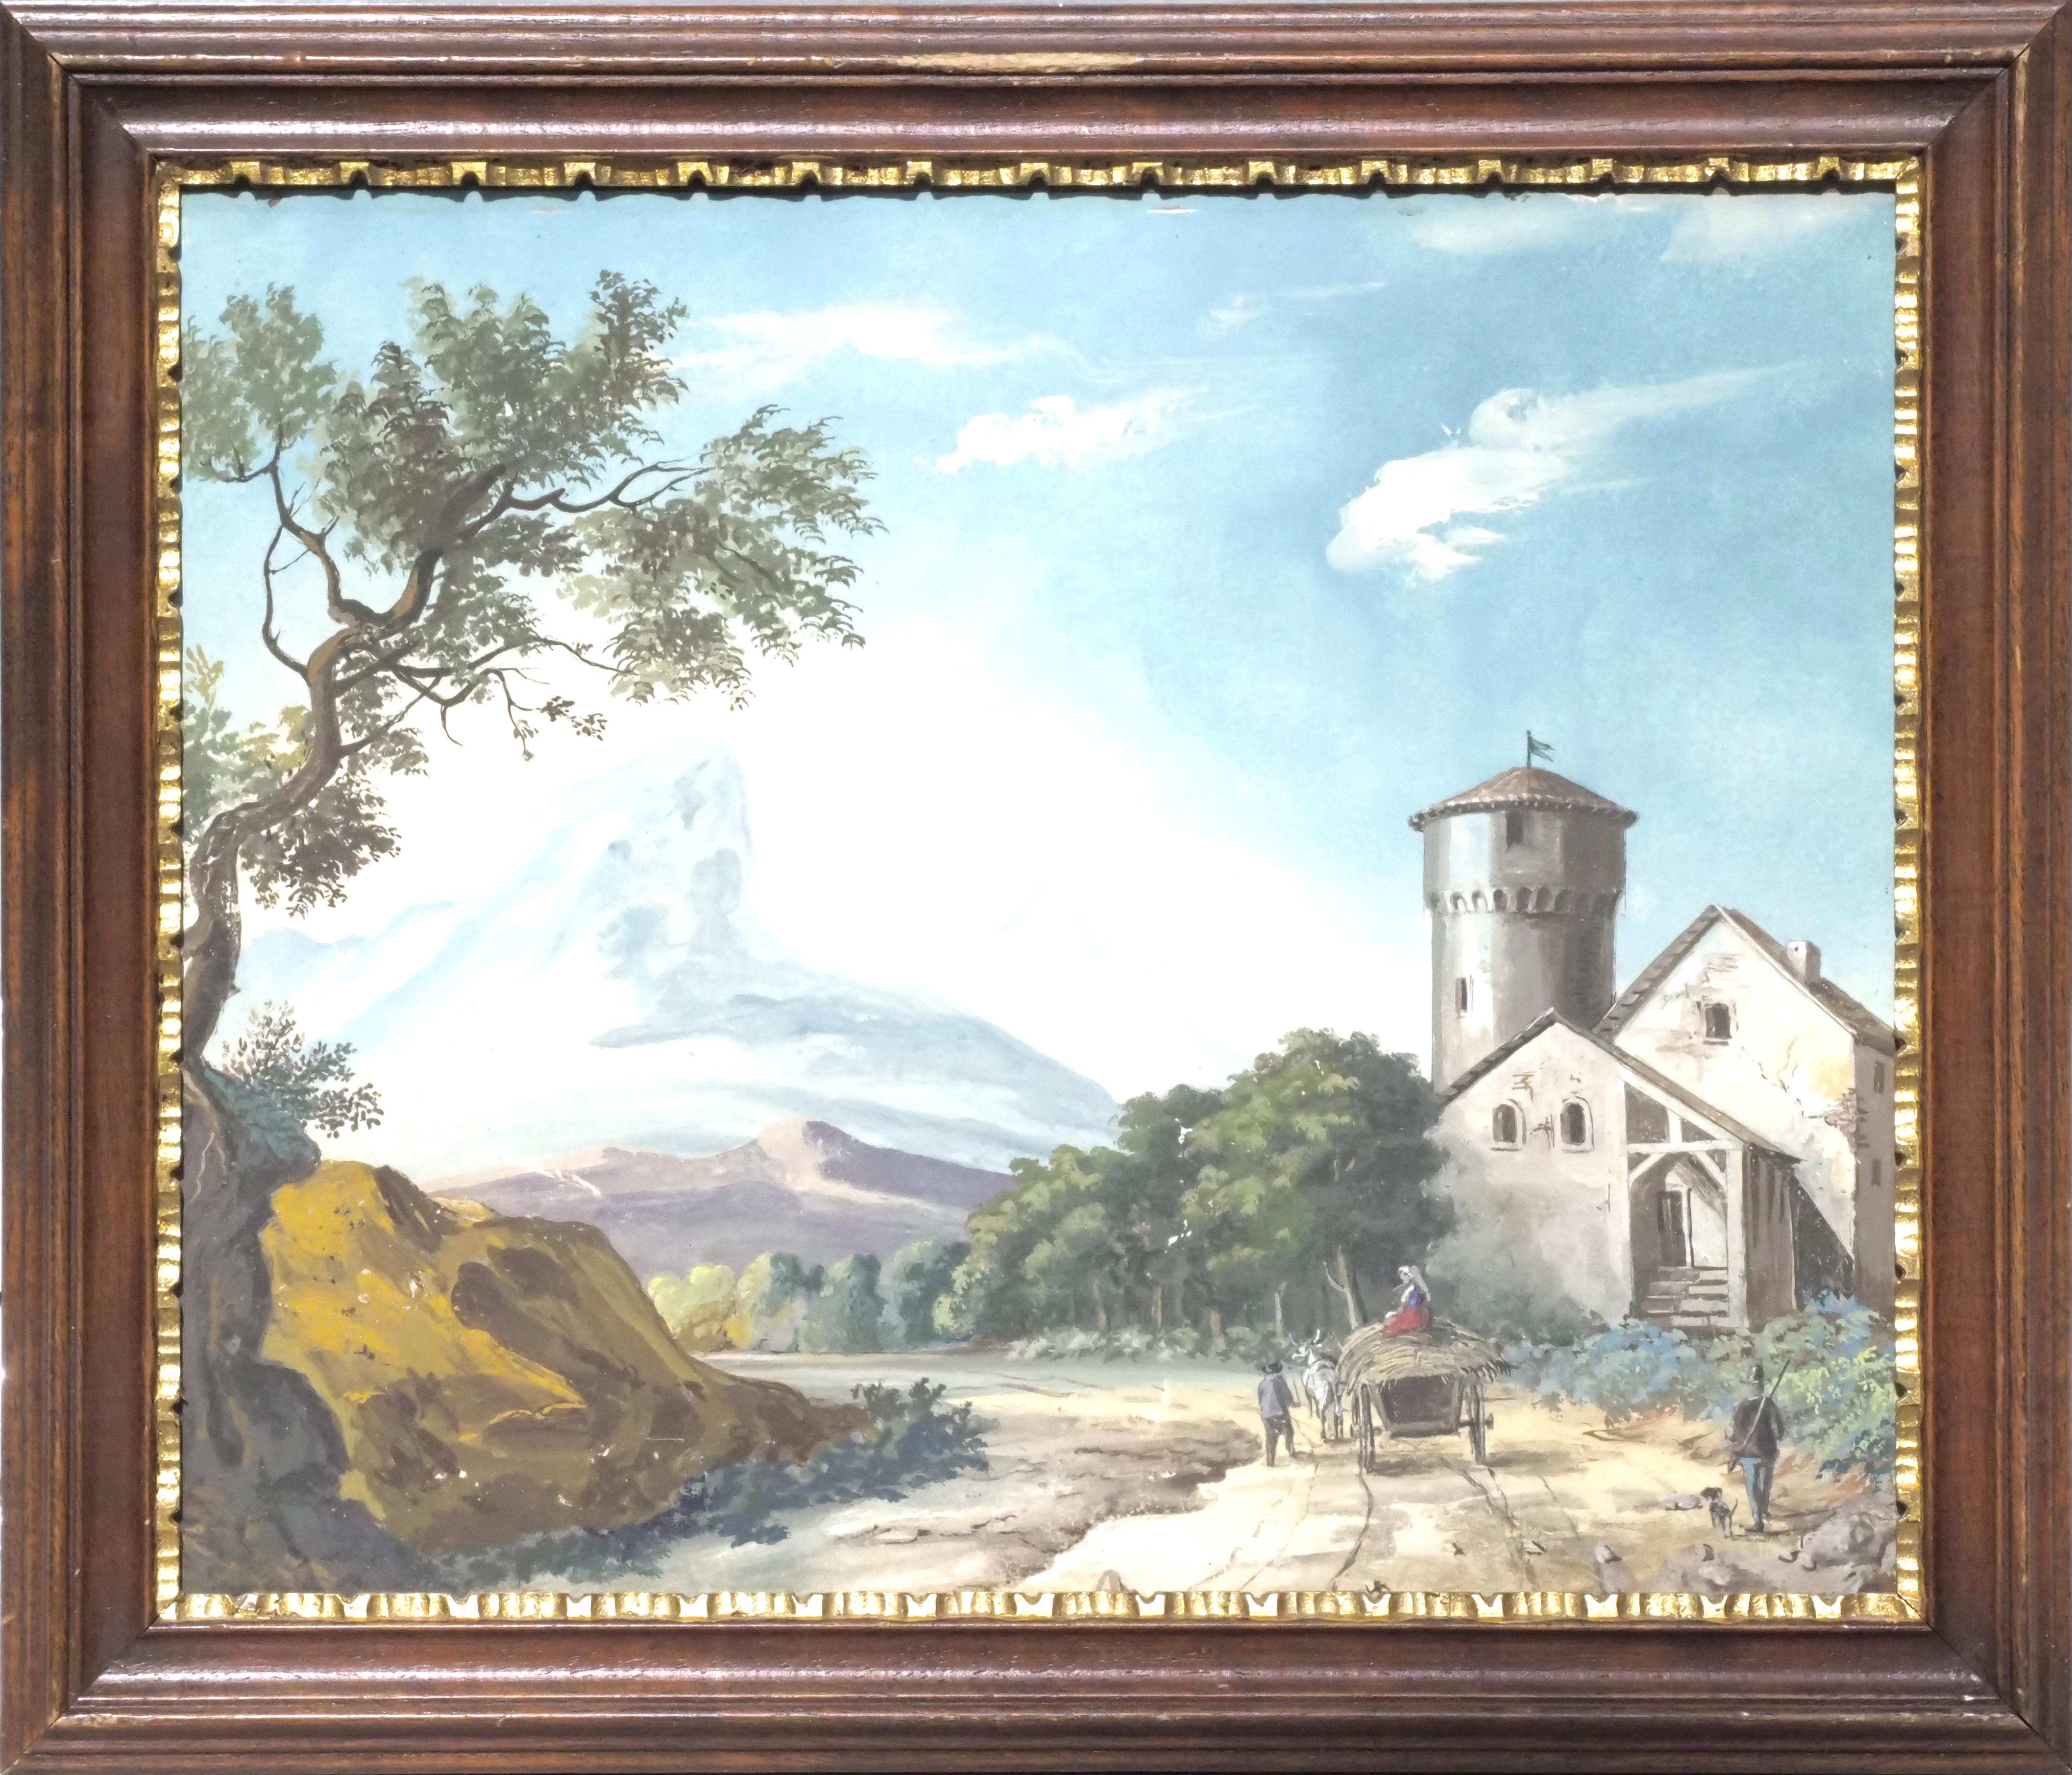 Four Dolomitic landscapes – Veneto XIX century
The lot includes four tempera-on-paper paintings with different views of Dolomitic landscapes created in Veneto in the early XIX century:
-	Dolomitic Alps landscape with cart, farmers and